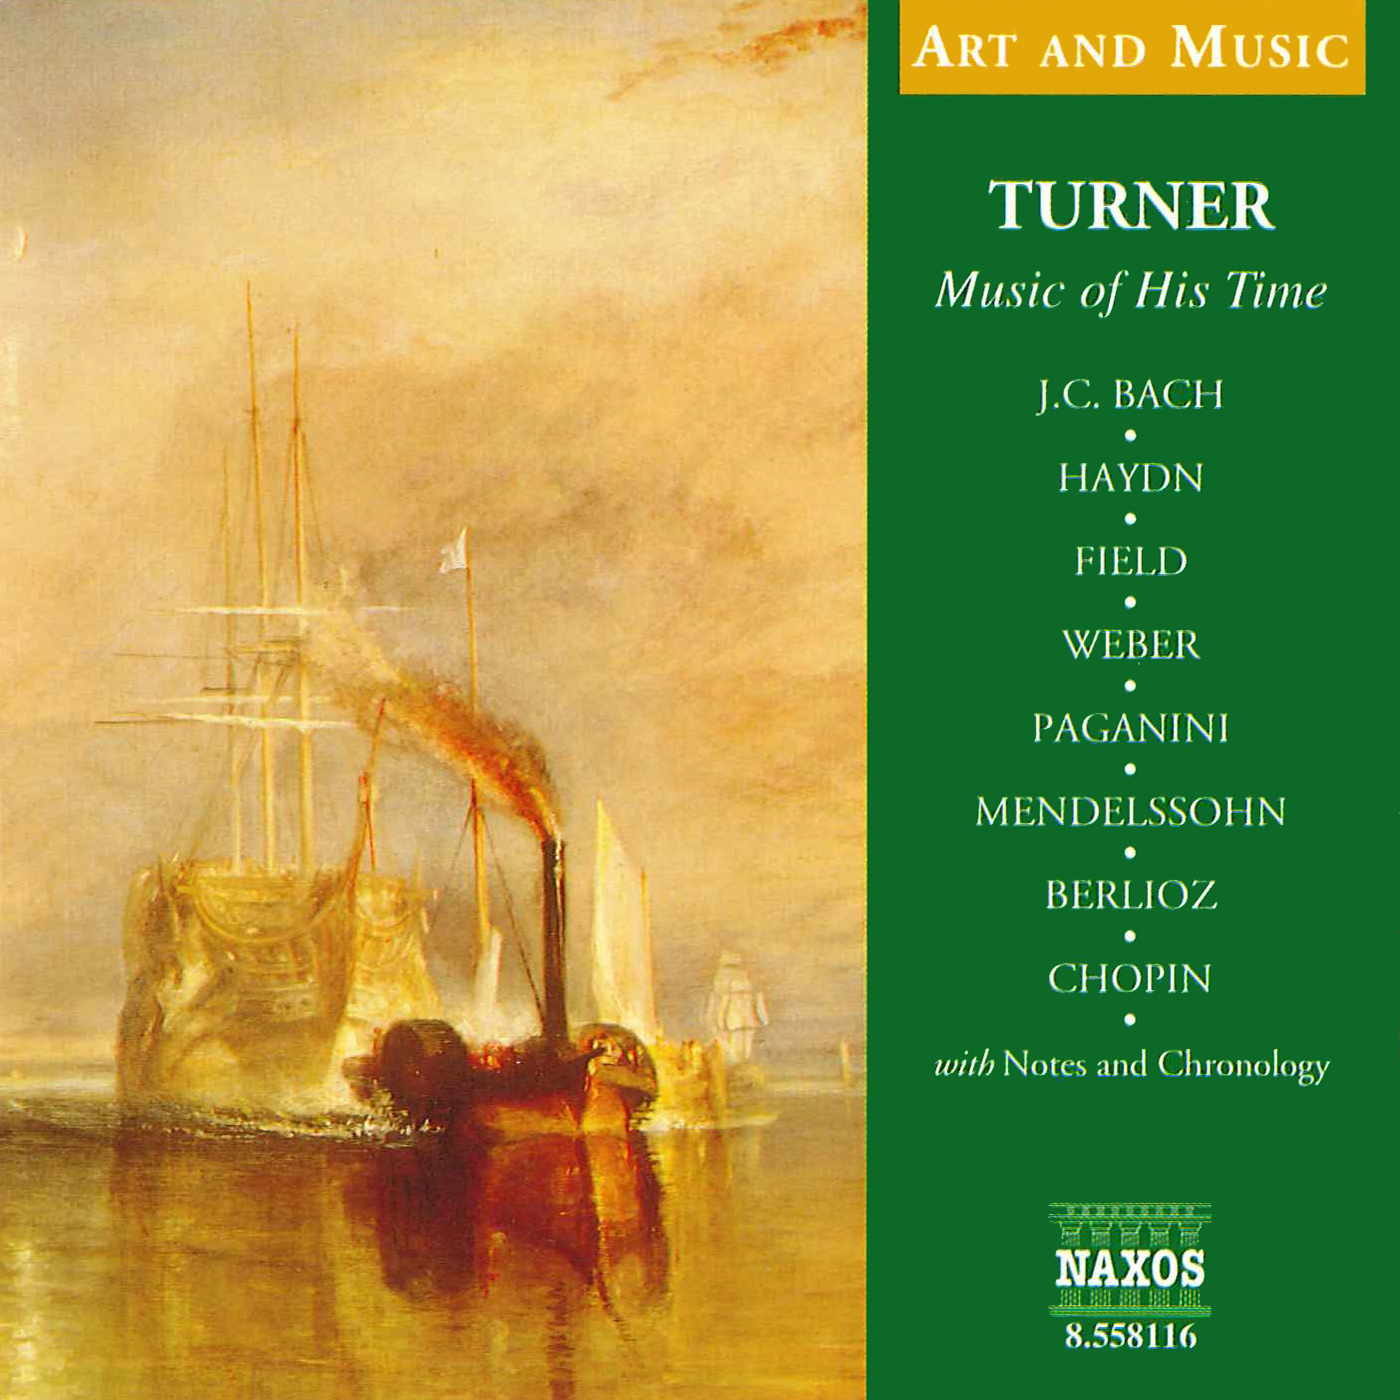 Art and Music: Turner - Music of His Time